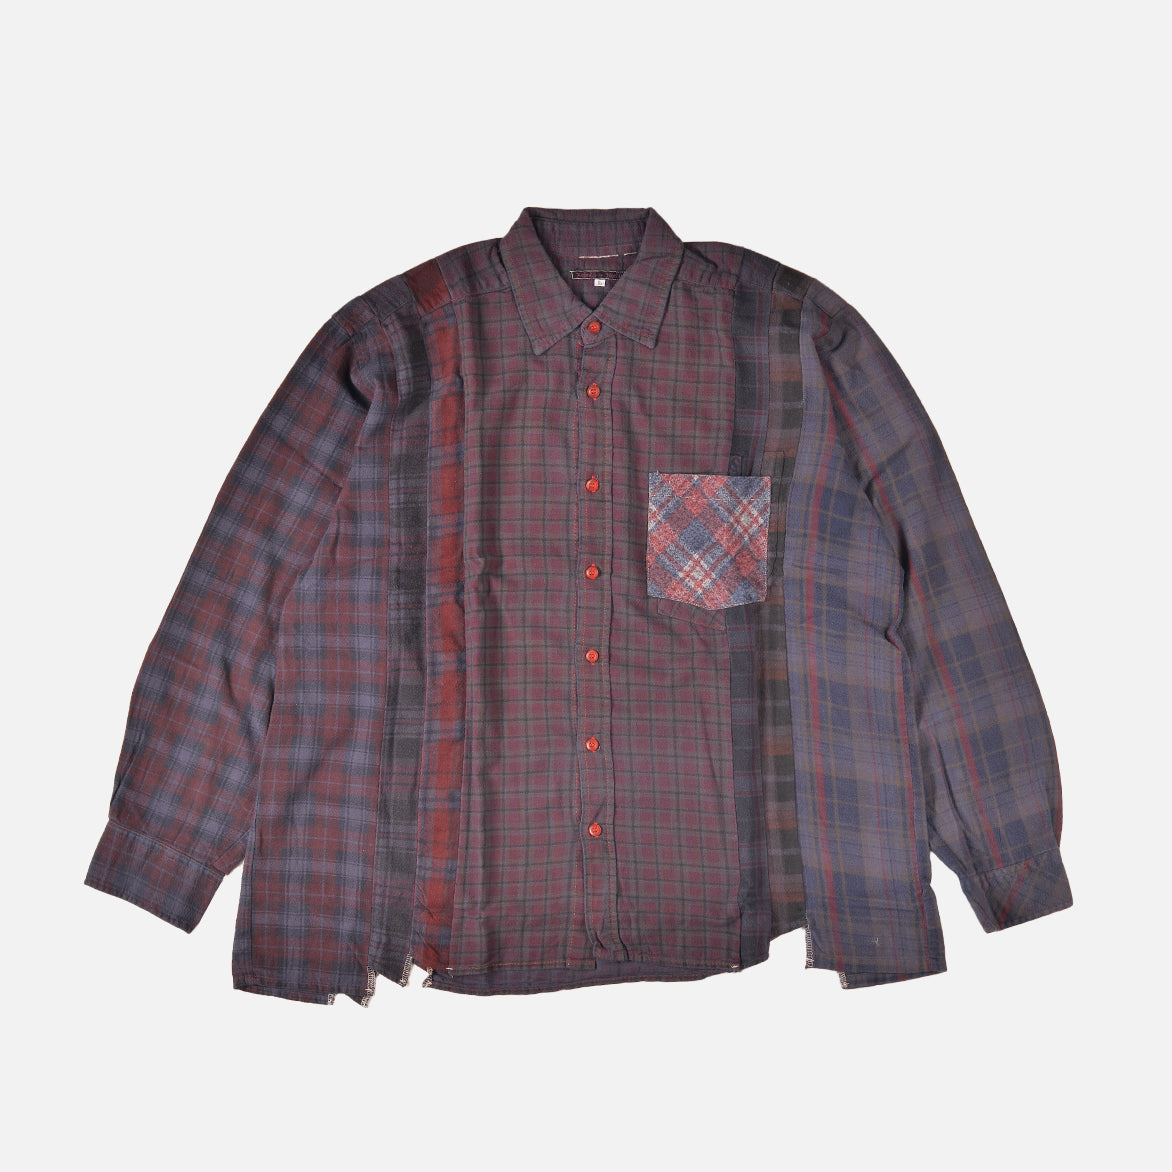 FLANNEL SHIRT -> 7 CUTS SHIRT / OVER DYE - LARGE